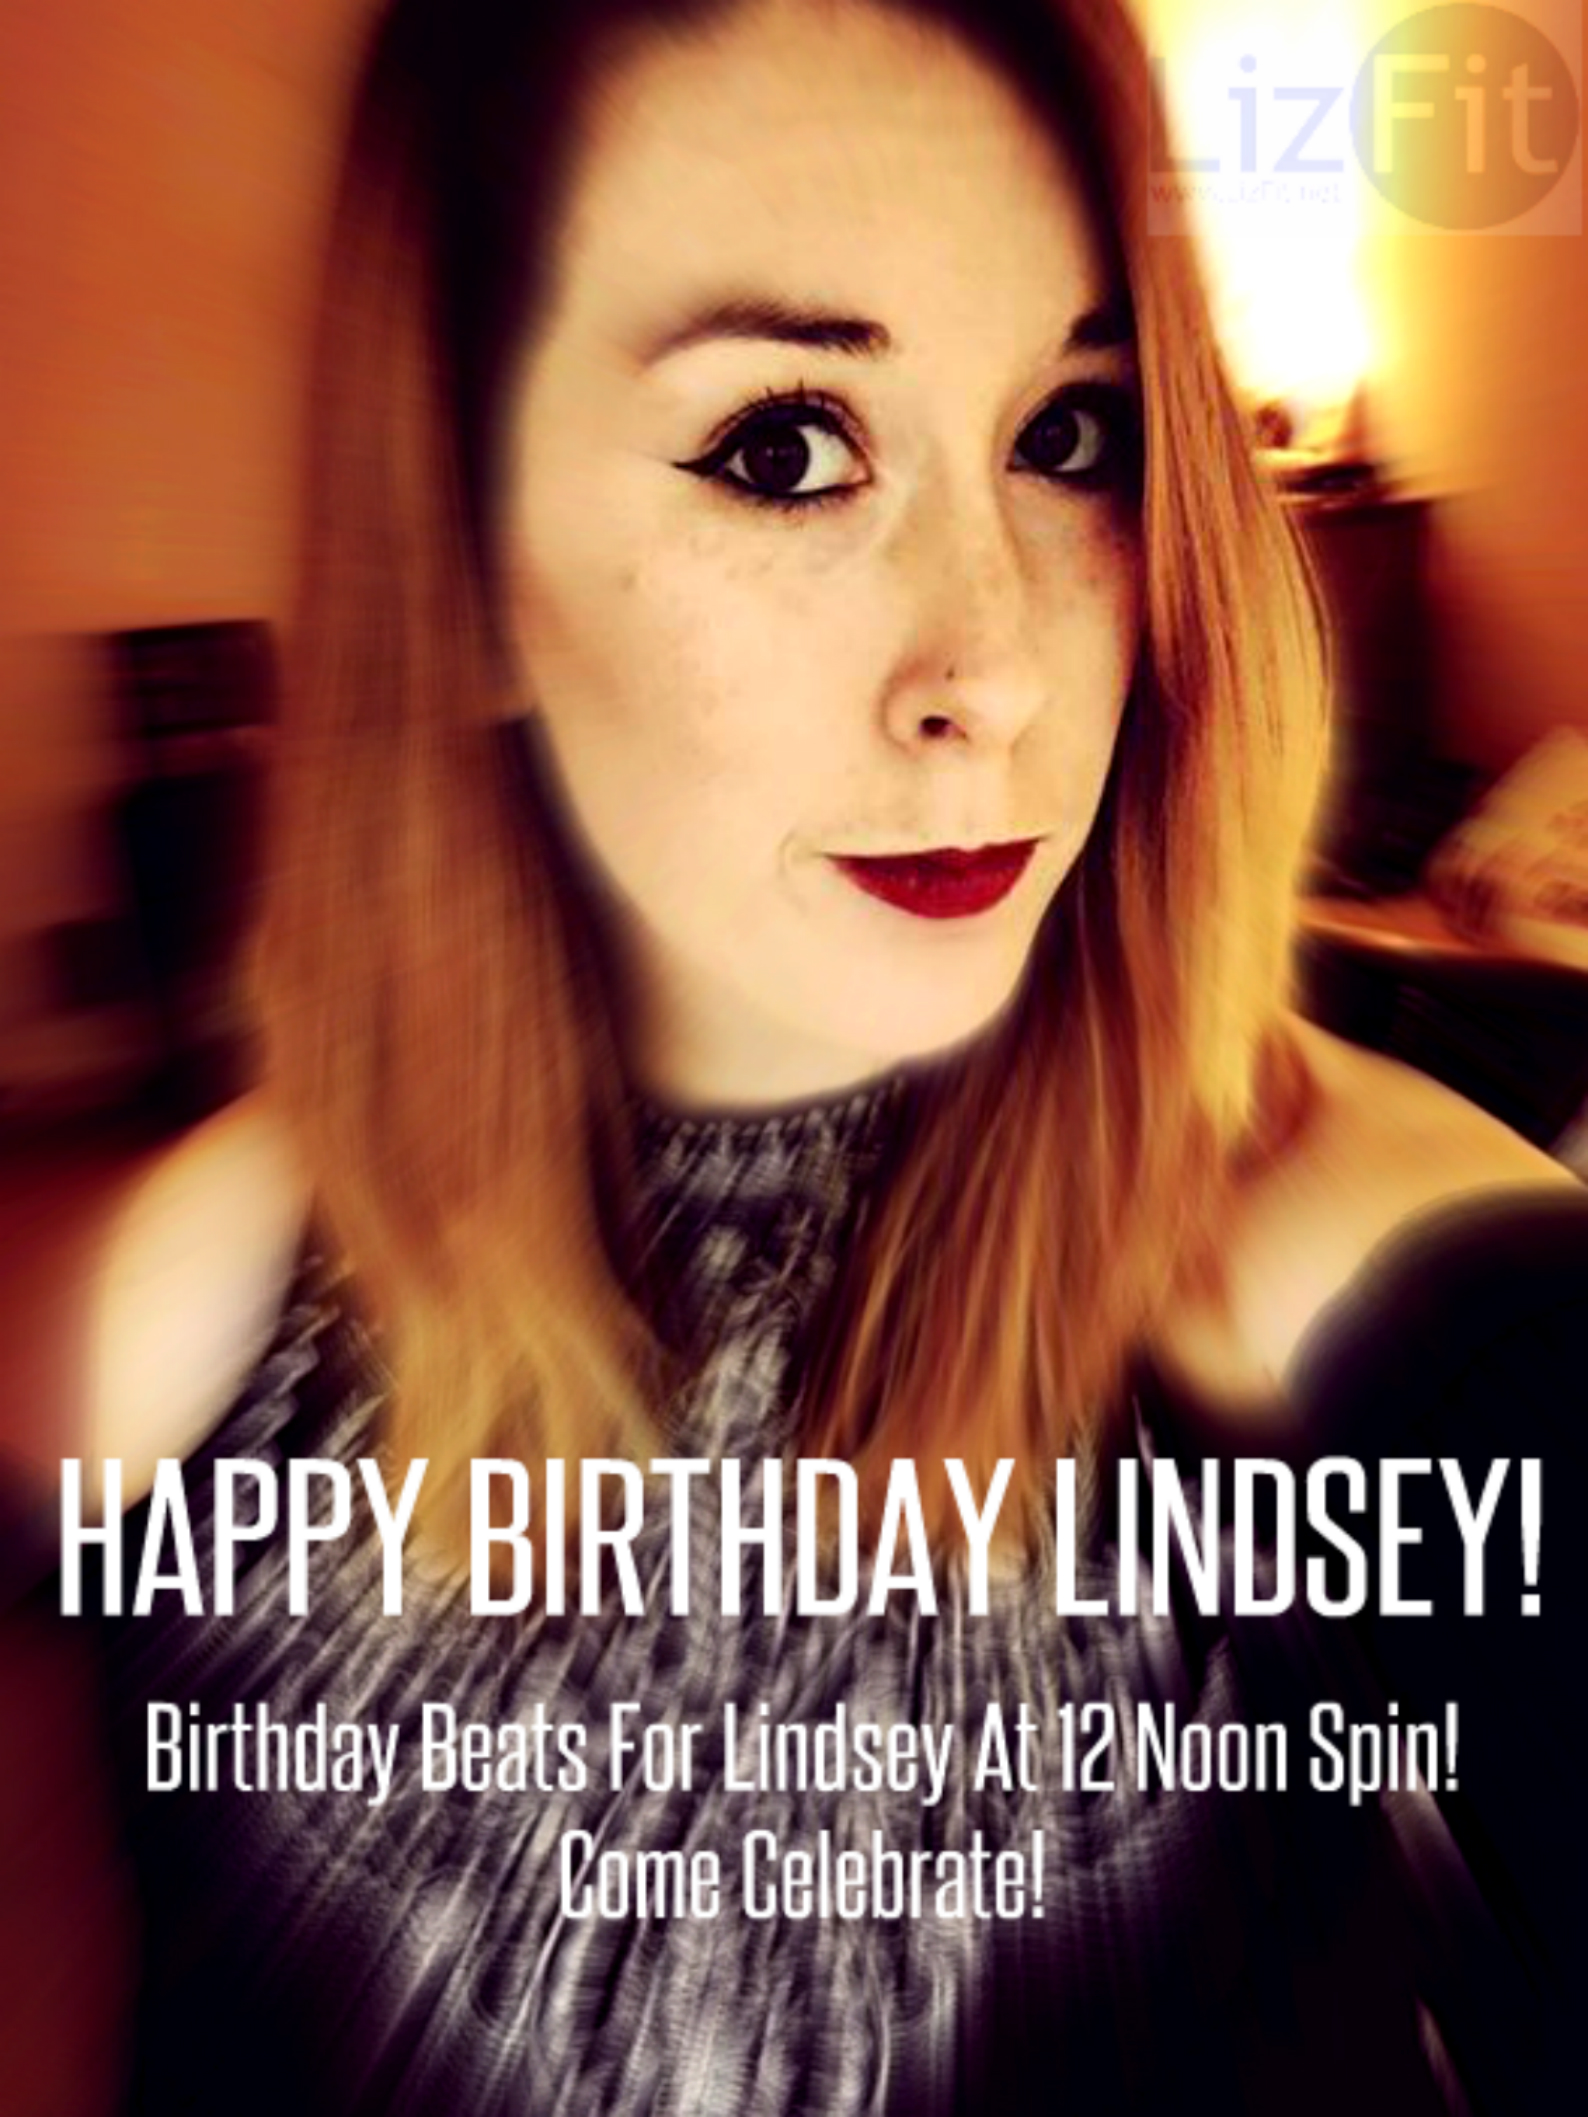 HappyMonday! We're thrilled that Lindsey @linsbed is back at the